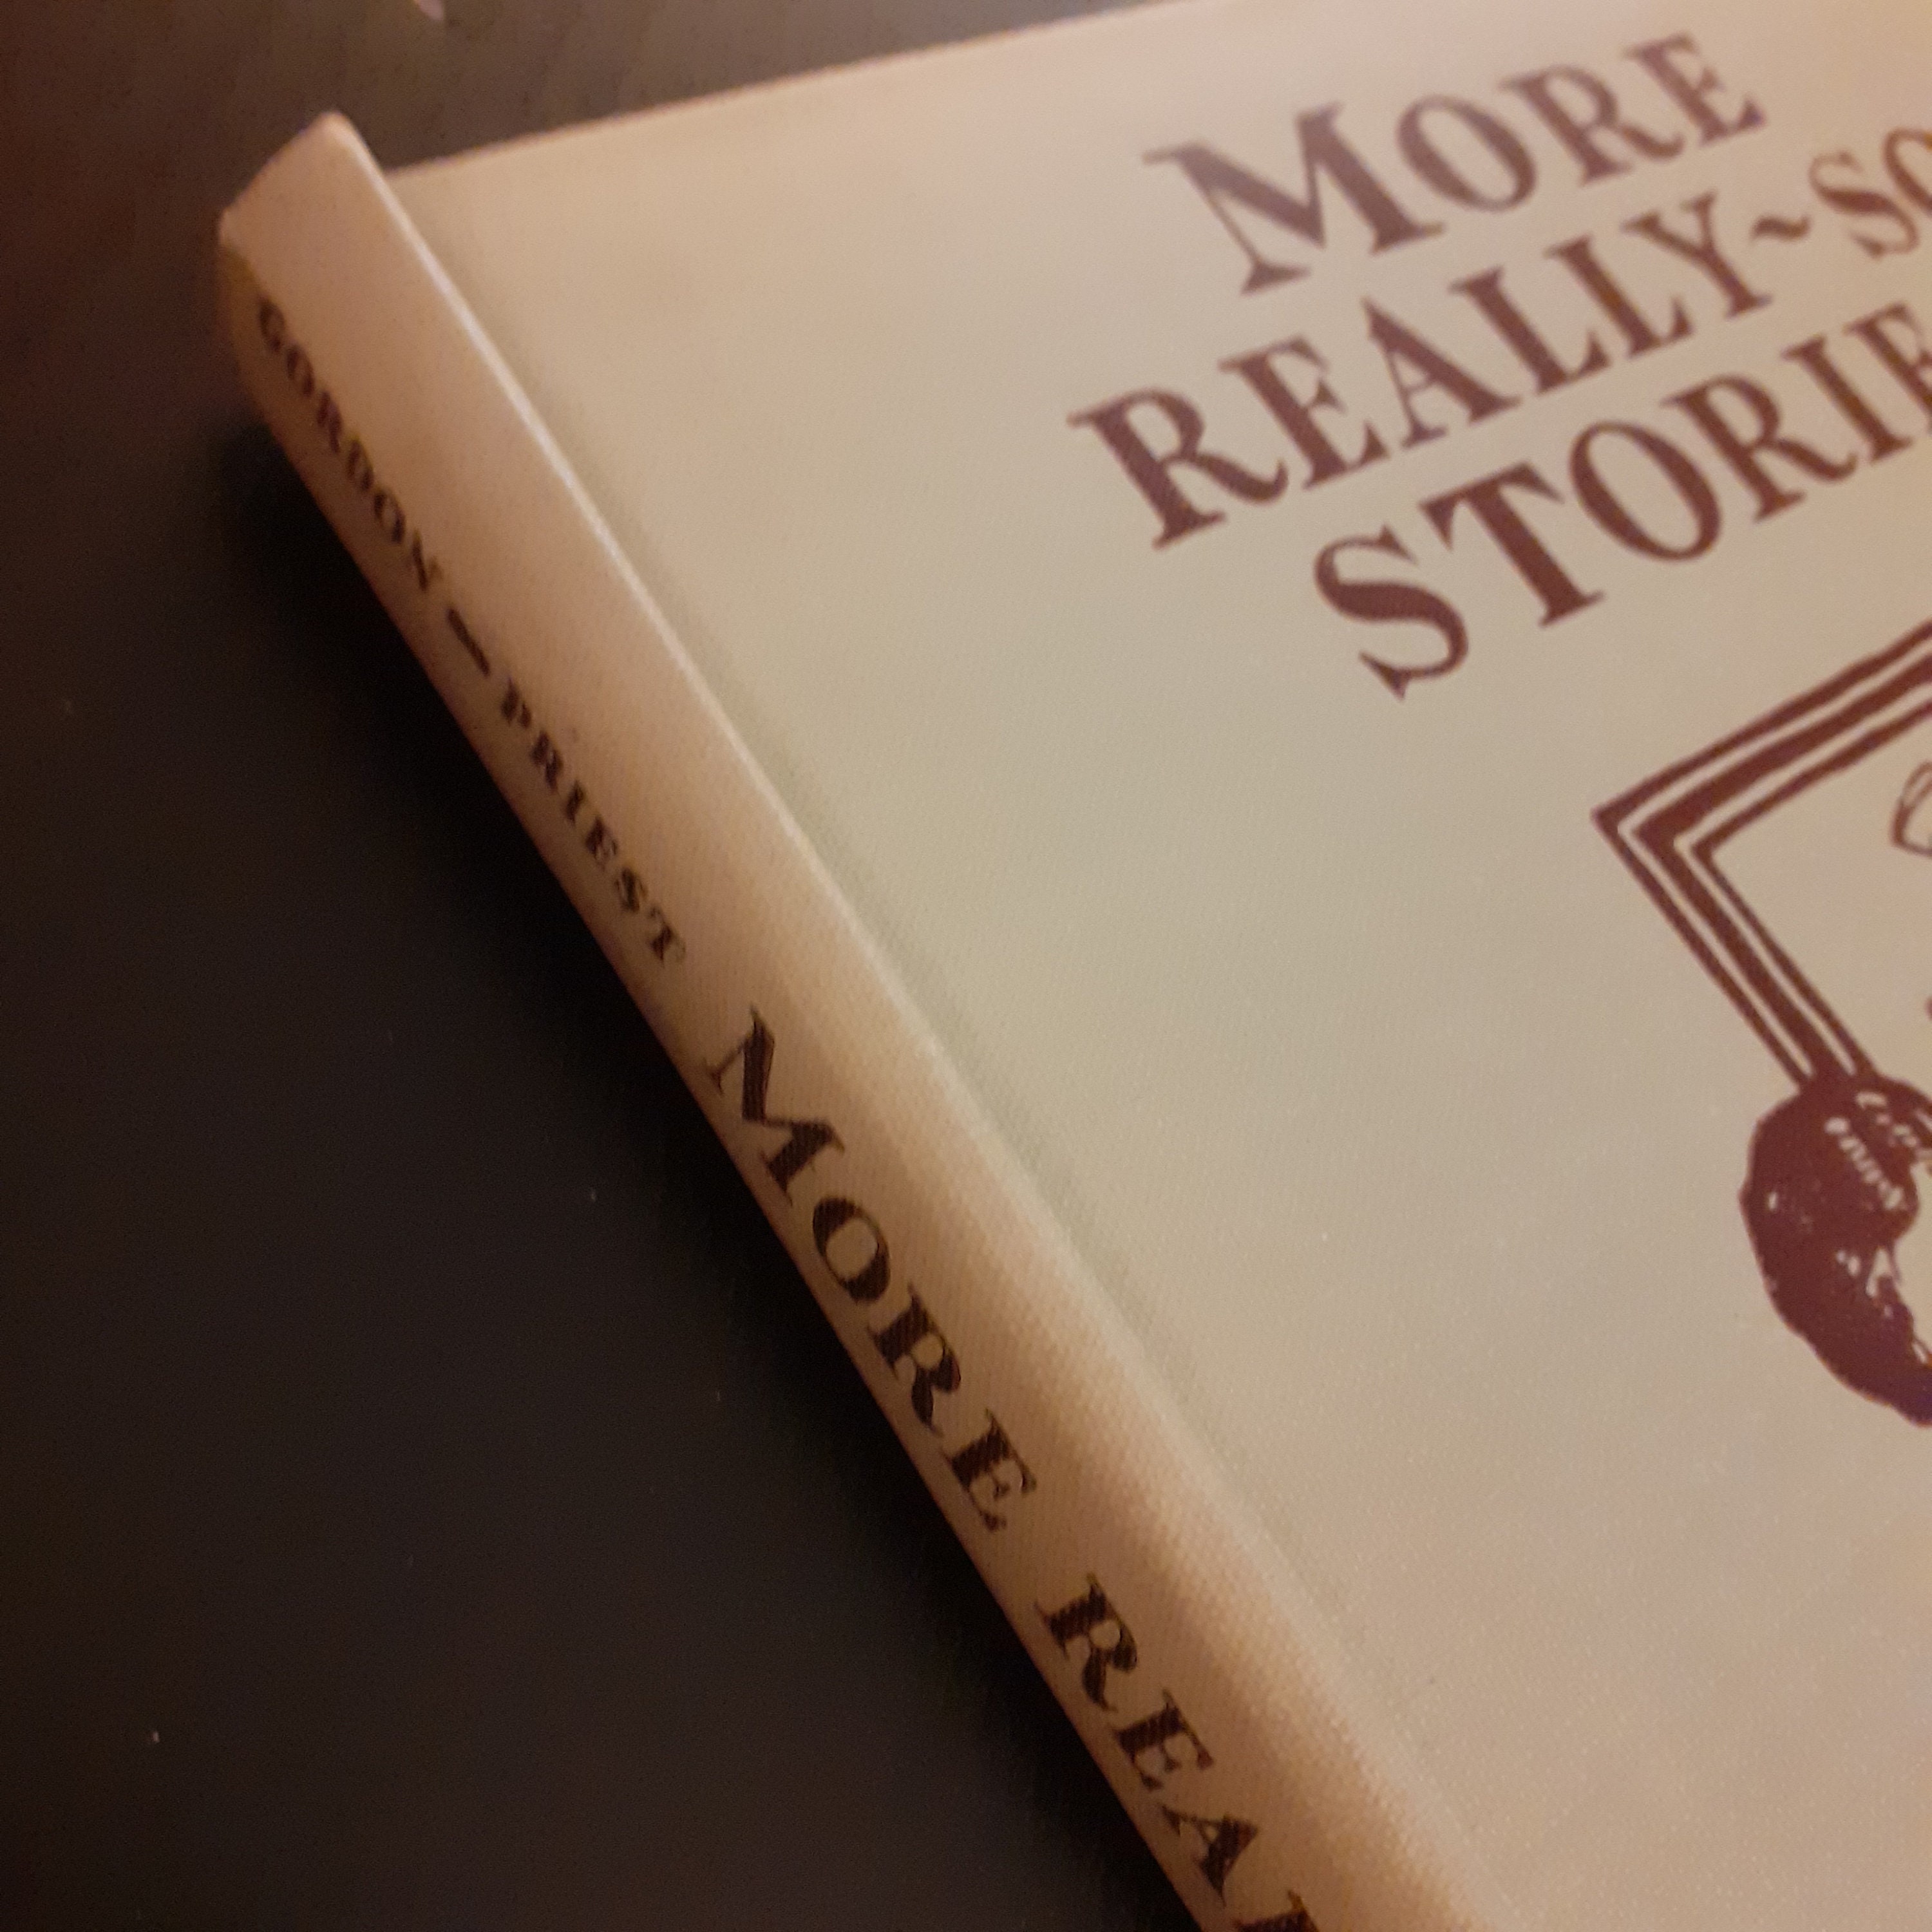 More Really so Stories by Elizabeth Gordon and Jane Priest 1939